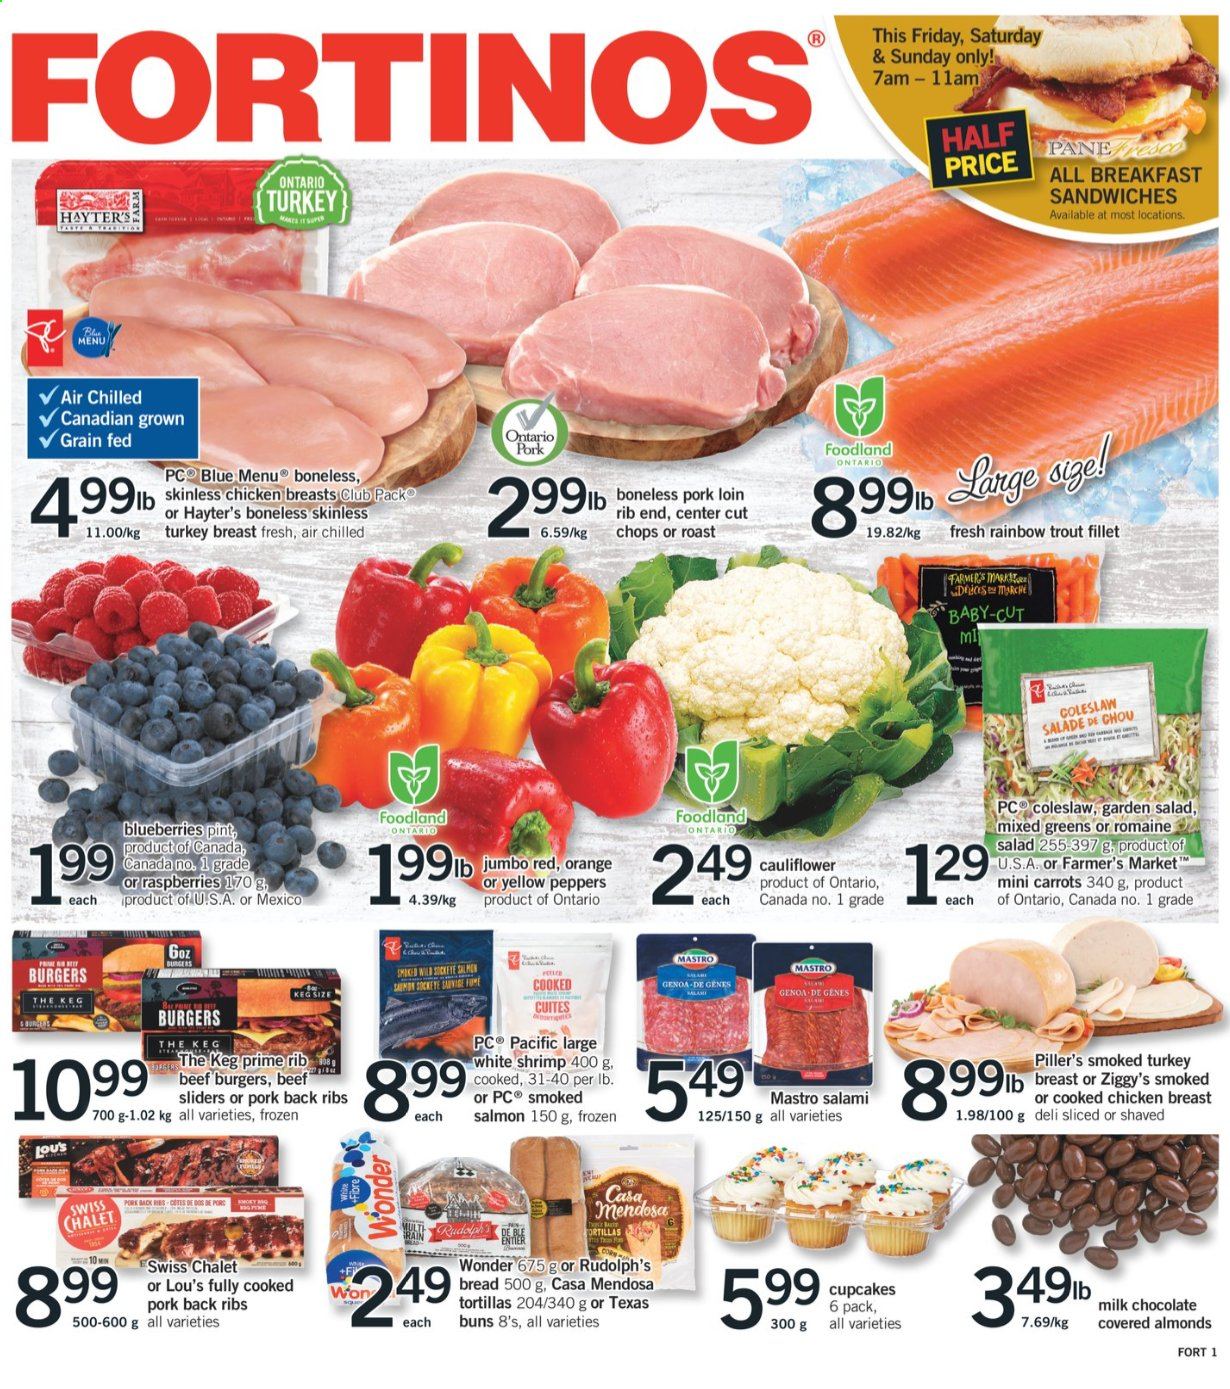 thumbnail - Fortinos Flyer - August 12, 2021 - August 18, 2021 - Sales products - bread, tortillas, buns, cupcake, carrots, cauliflower, peppers, blueberries, salmon, smoked salmon, trout, shrimps, coleslaw, hamburger, beef burger, salami, milk chocolate, almonds, turkey breast, chicken breasts, chicken, turkey, pork loin, pork meat, pork ribs, pork back ribs. Page 1.